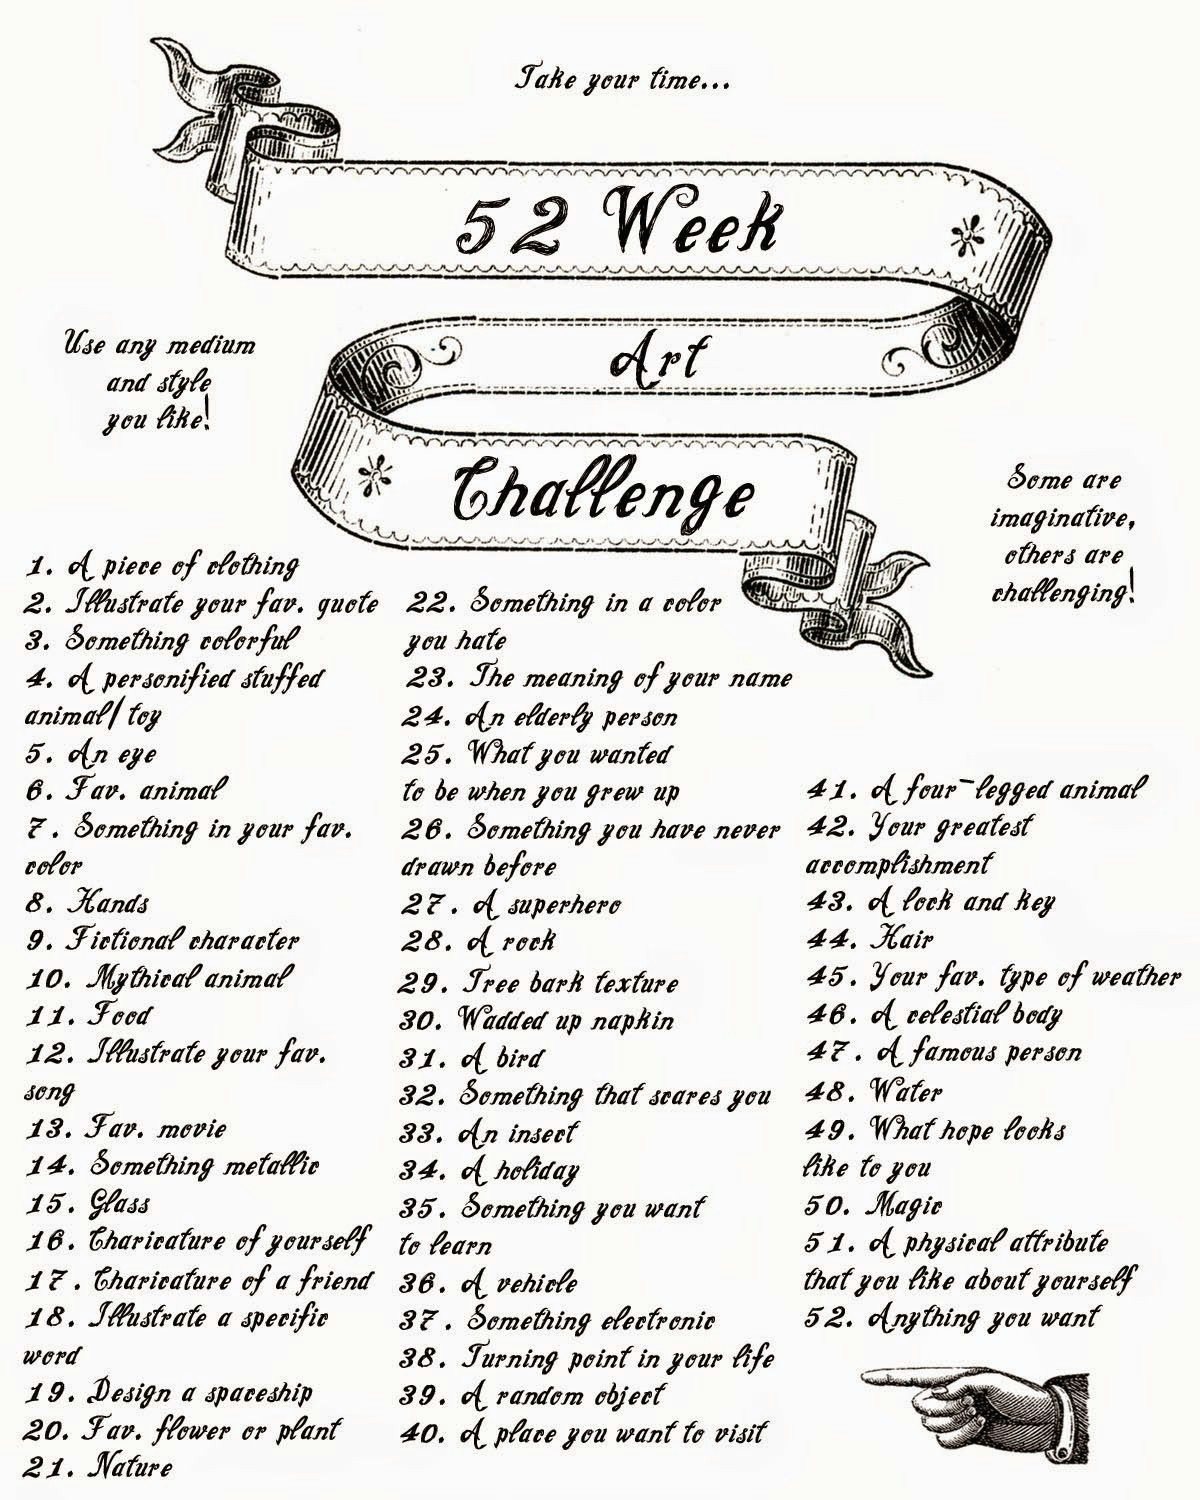 Drawing Journal Prompts 52 Week Art Challenge the Starving Arts Painting Pinterest